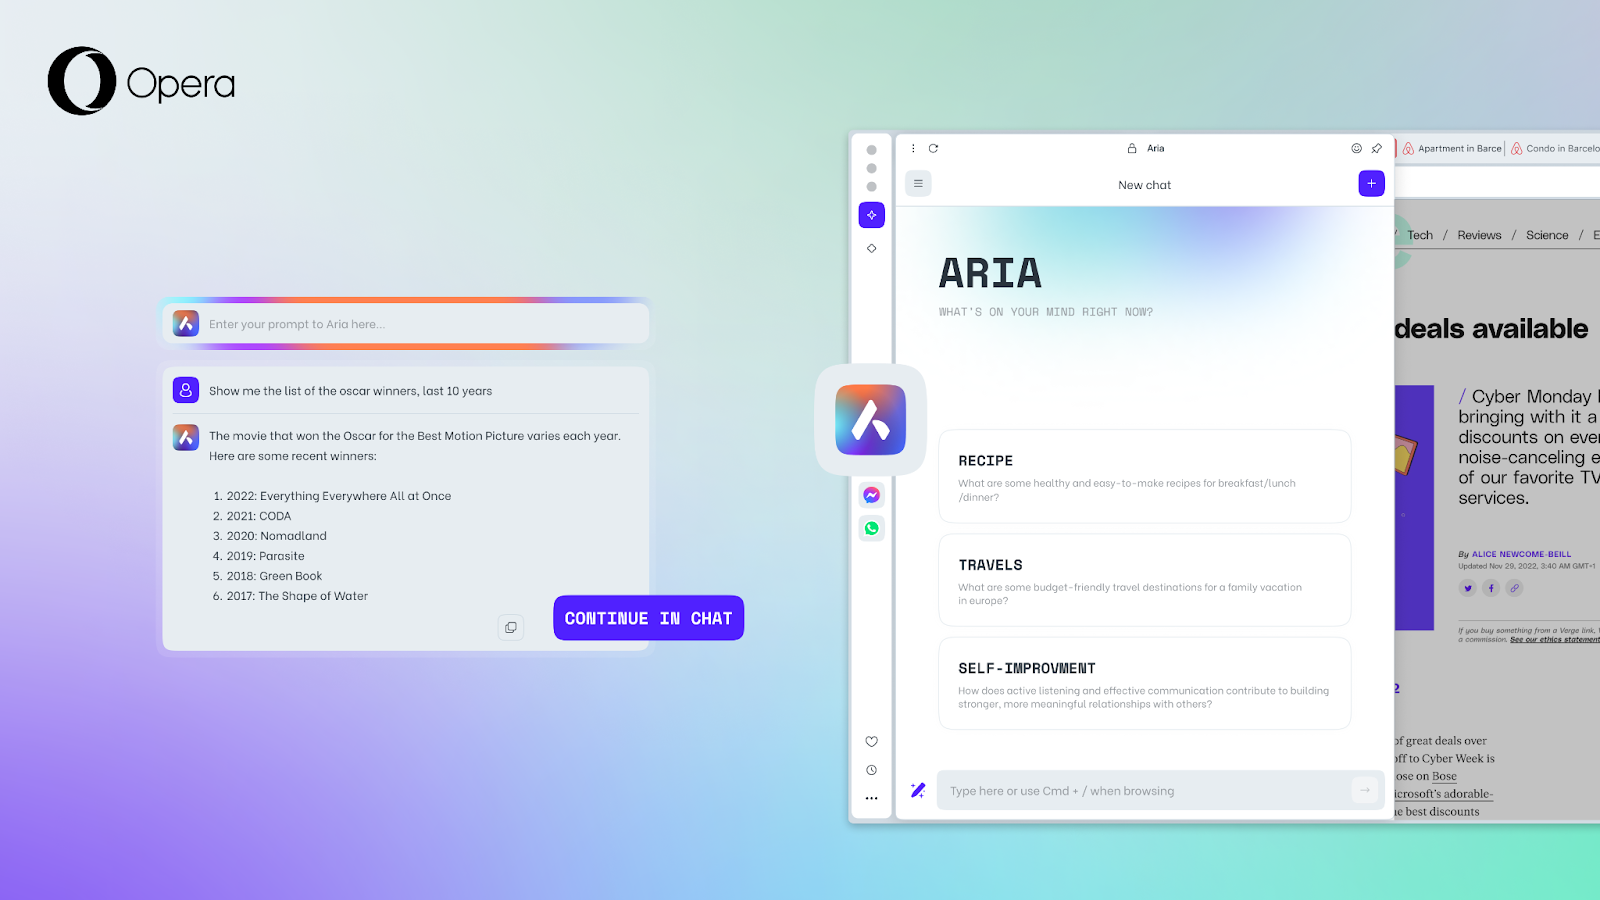 Aria's command Line update makes it possible to stay in the command line. Aria now answers to your queries in the command line itself. You can also click the continue in chat button to go to a normal chat with Aria.